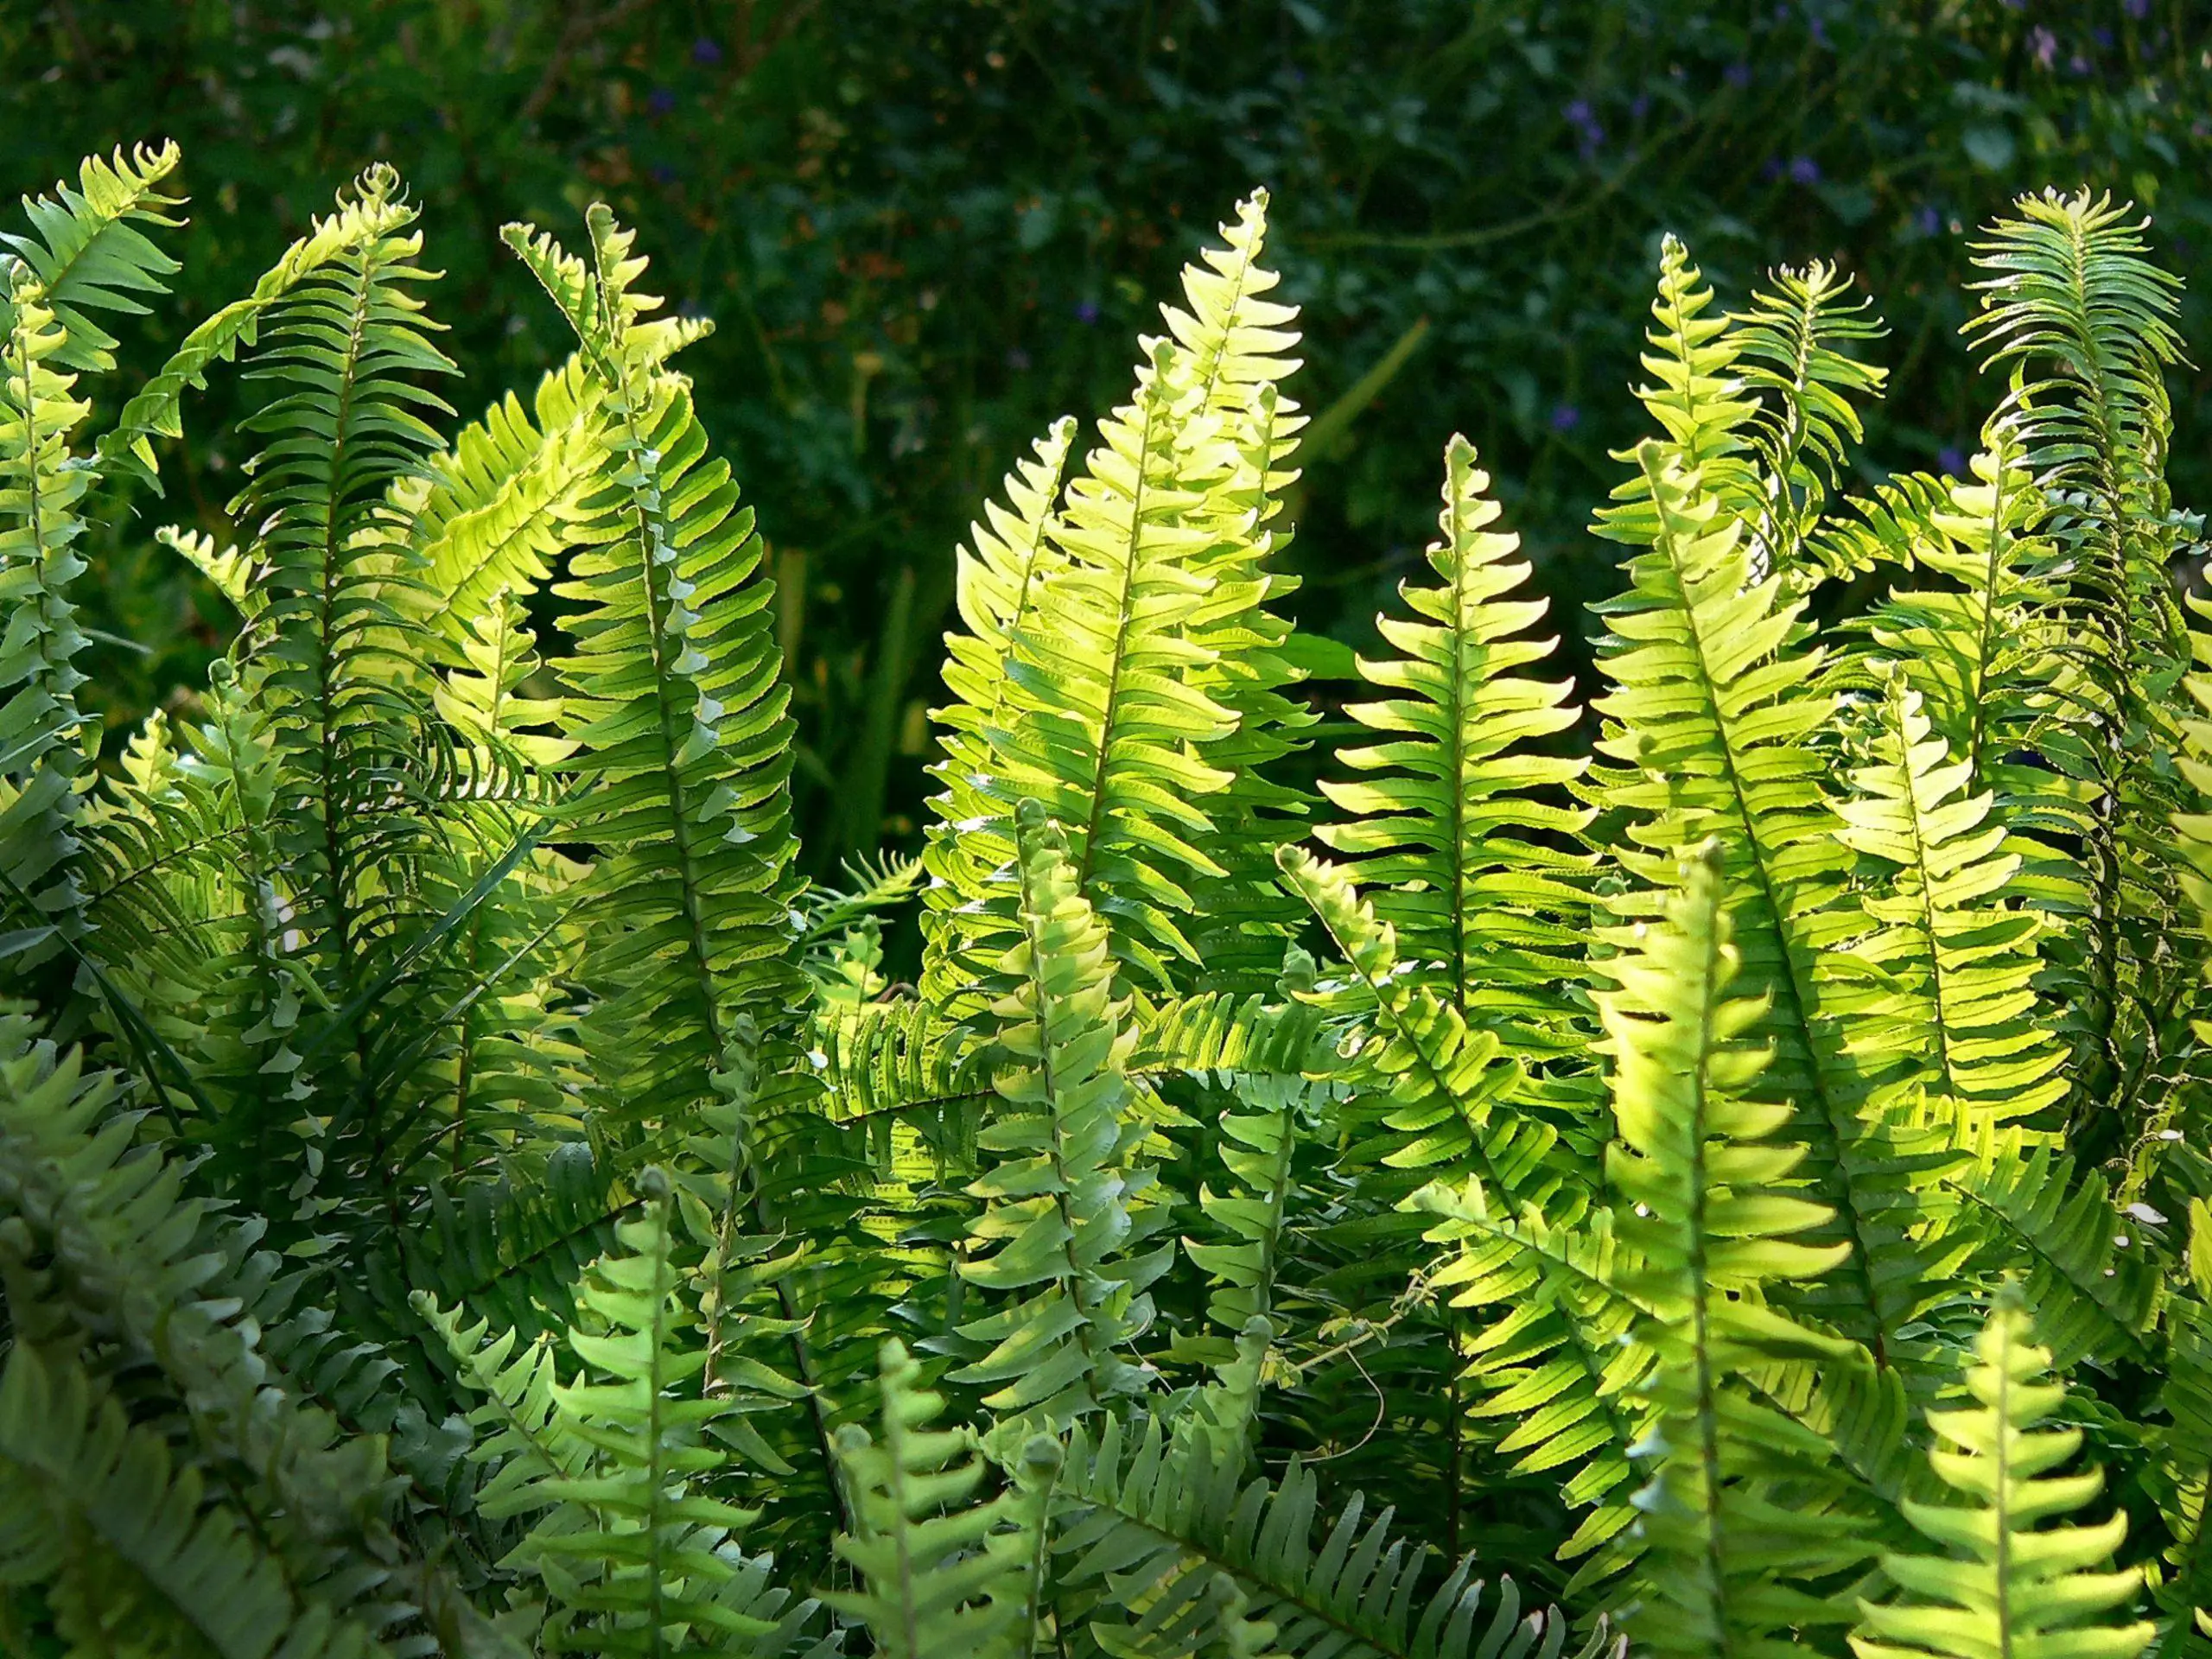 Ferns growing vertically in the sunshine